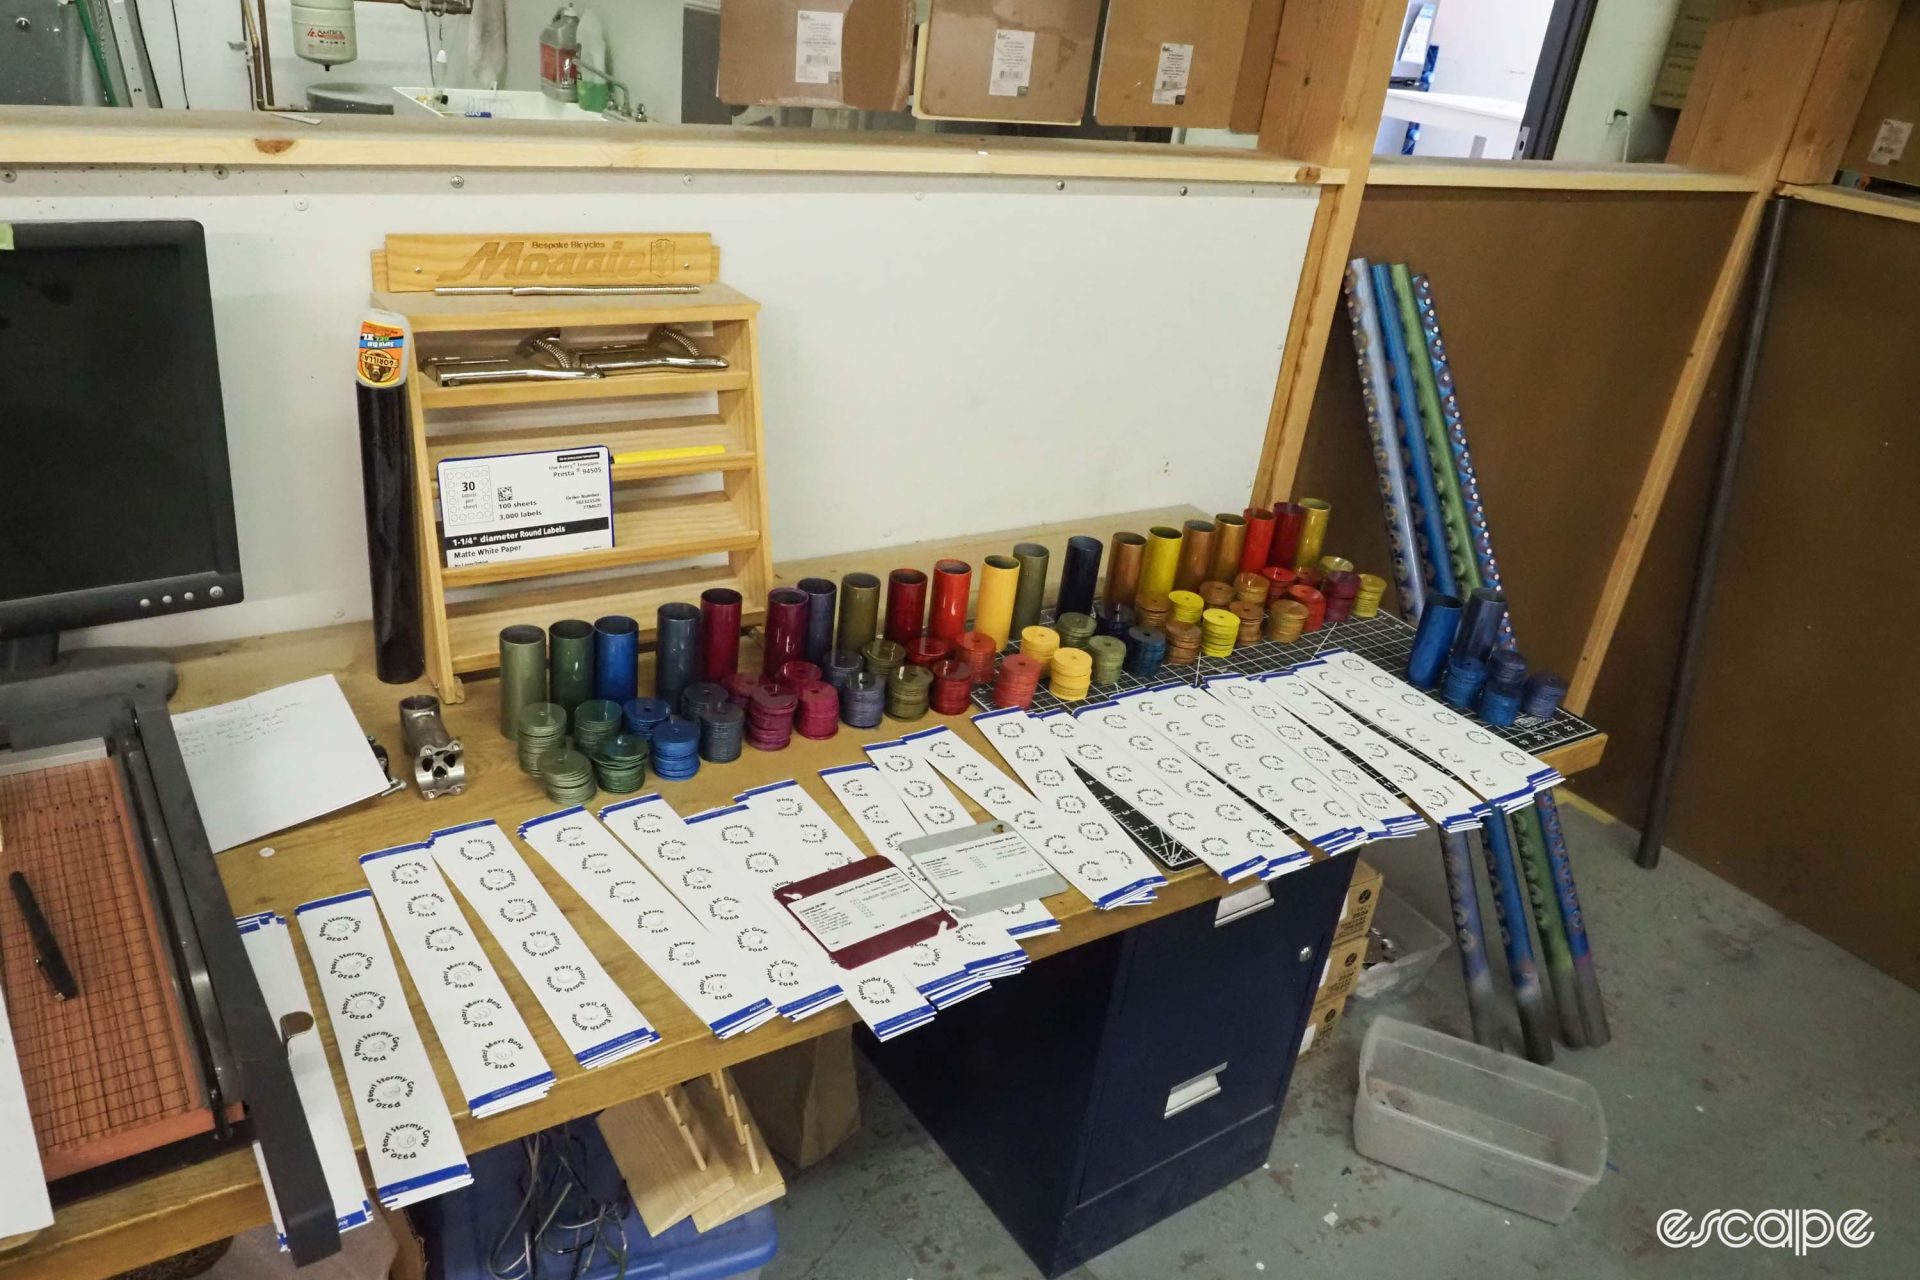 Paint samples are laid out on a table to box and ship to dealers.